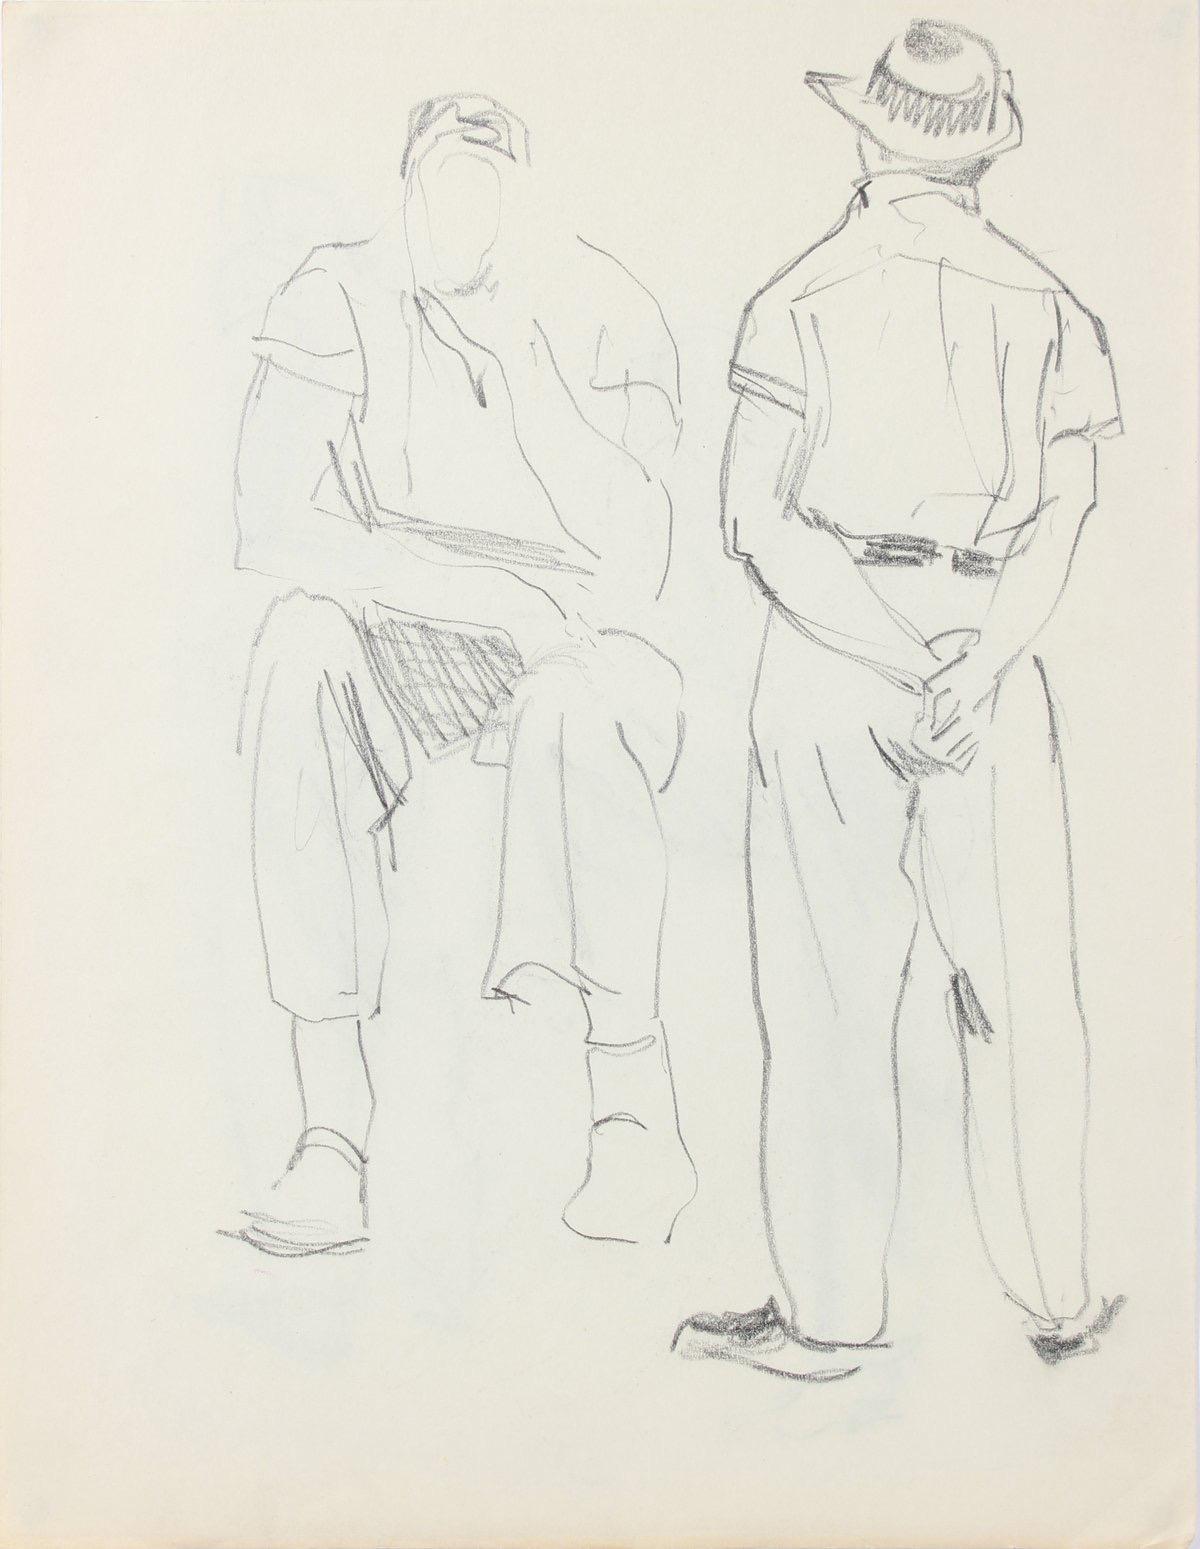 Double-Sided Stylized Sketch of Two Male Figures 1940-50s Graphite - Art by Richard Caldwell Brewer